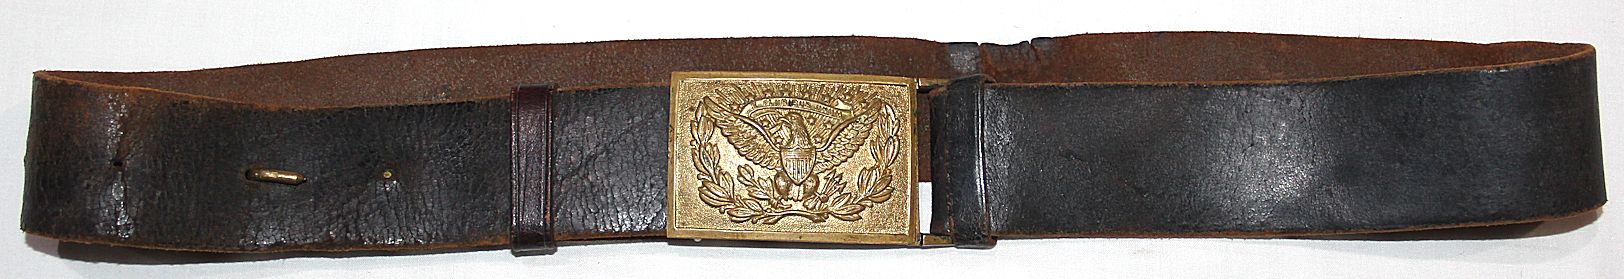 A078. M1874 OFFICERS BELT BUCKLE WITH LEATHER BELT - B & B Militaria